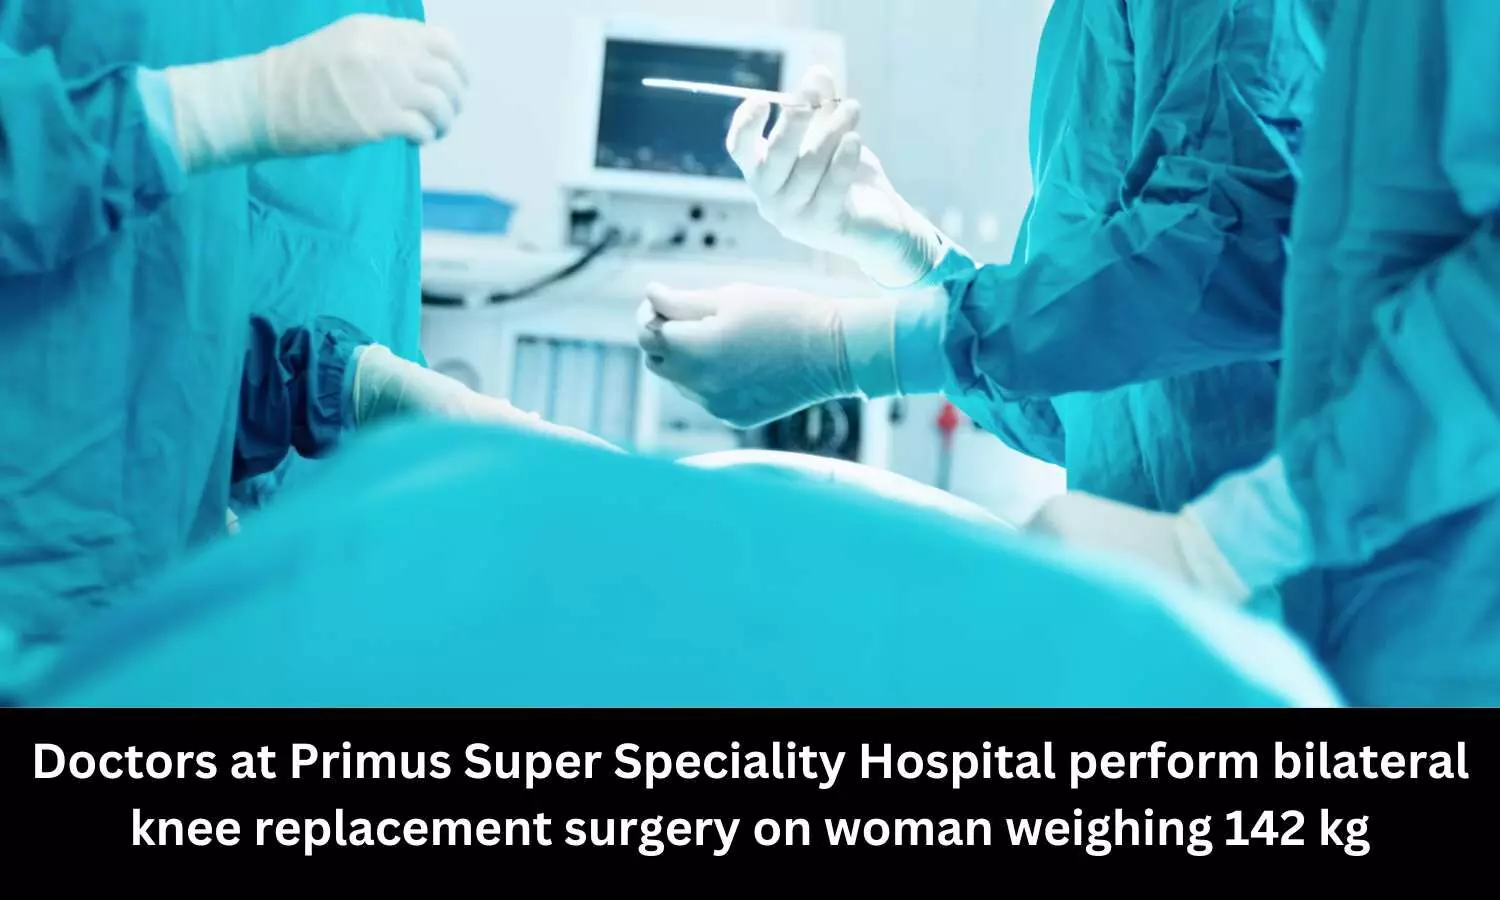 Primus Super Speciality Hospital doctors perform bilateral knee replacement surgery on woman weighing 142 kg